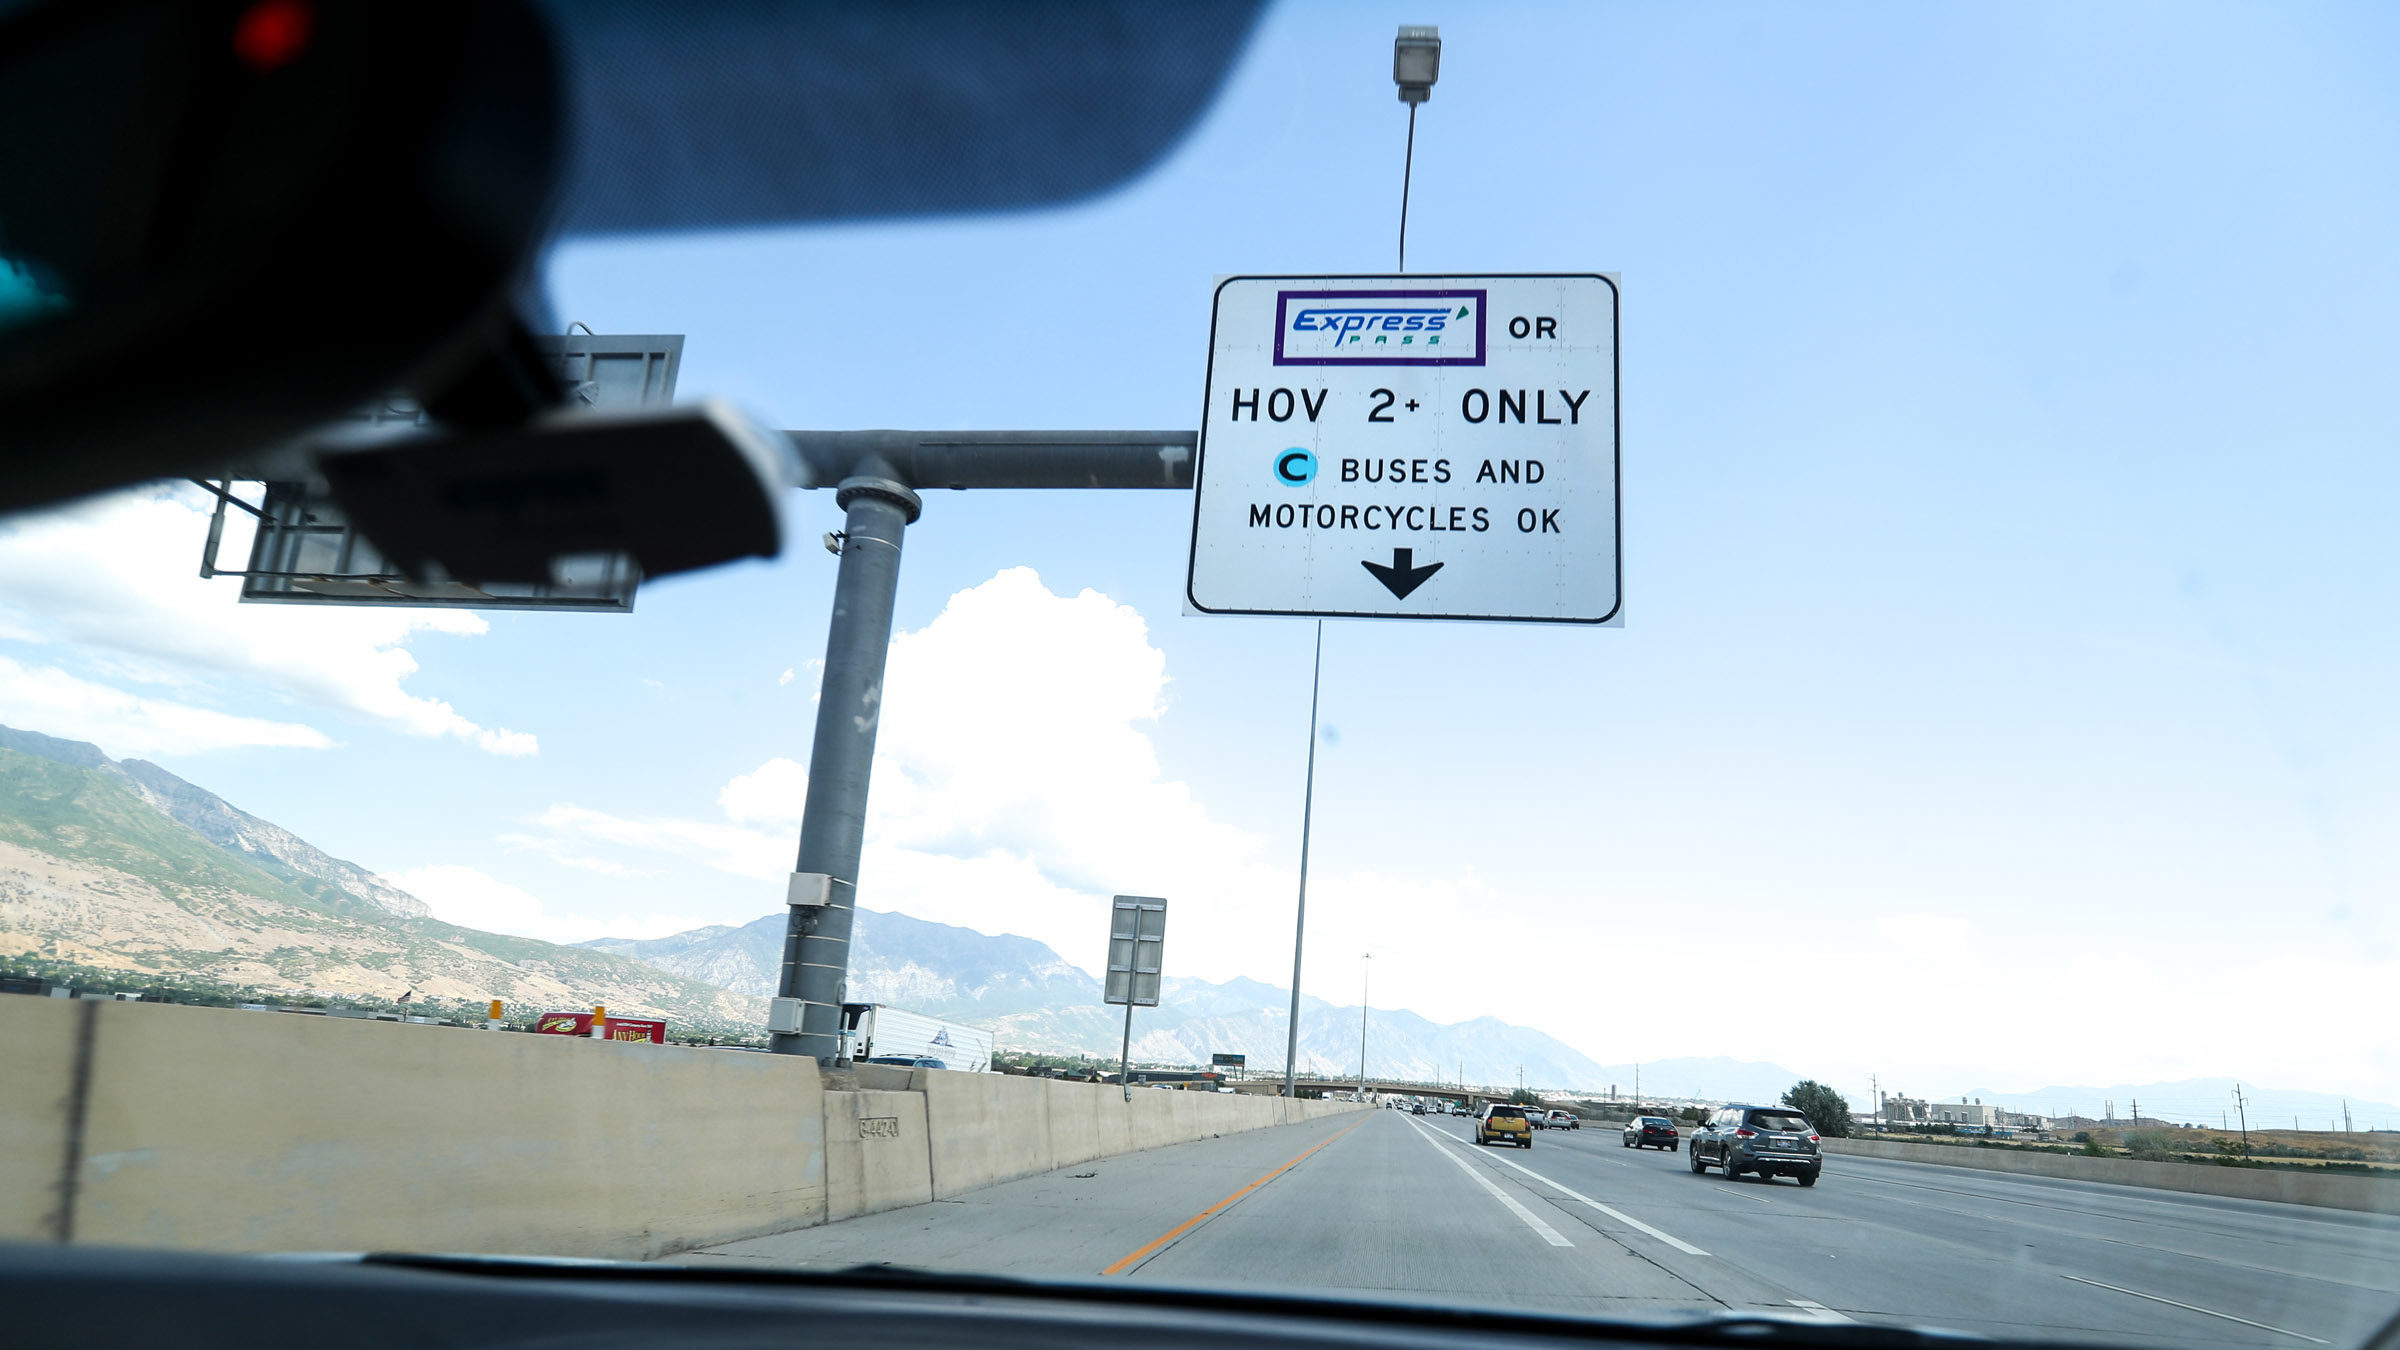 hov lane is pictured, the highway patrol gets a lot of strange questions about utah traffic laws...